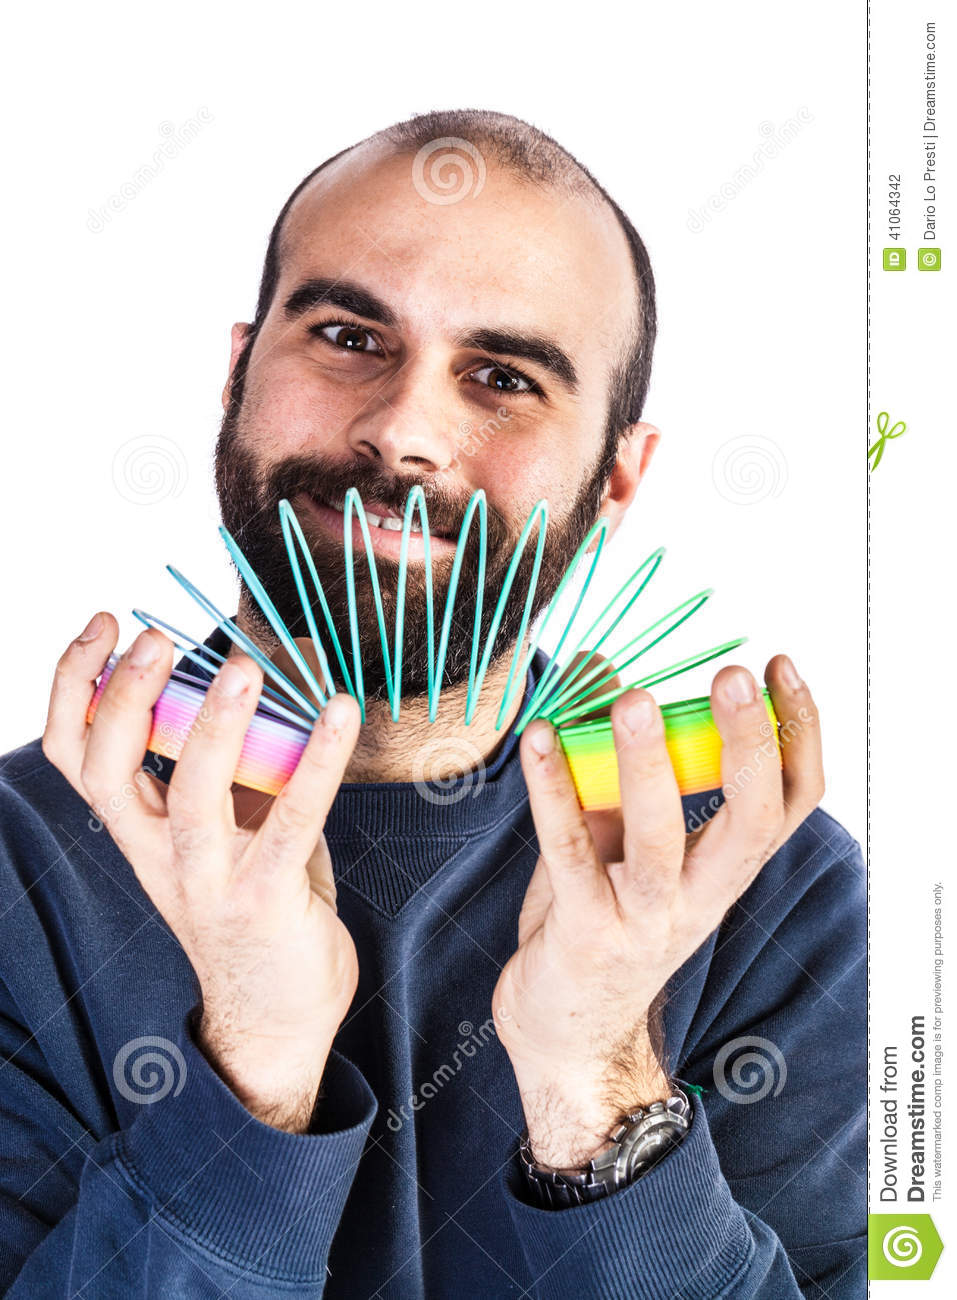 Bearded Man Playing With A Rainbow Slinky Toy And Looking Silly